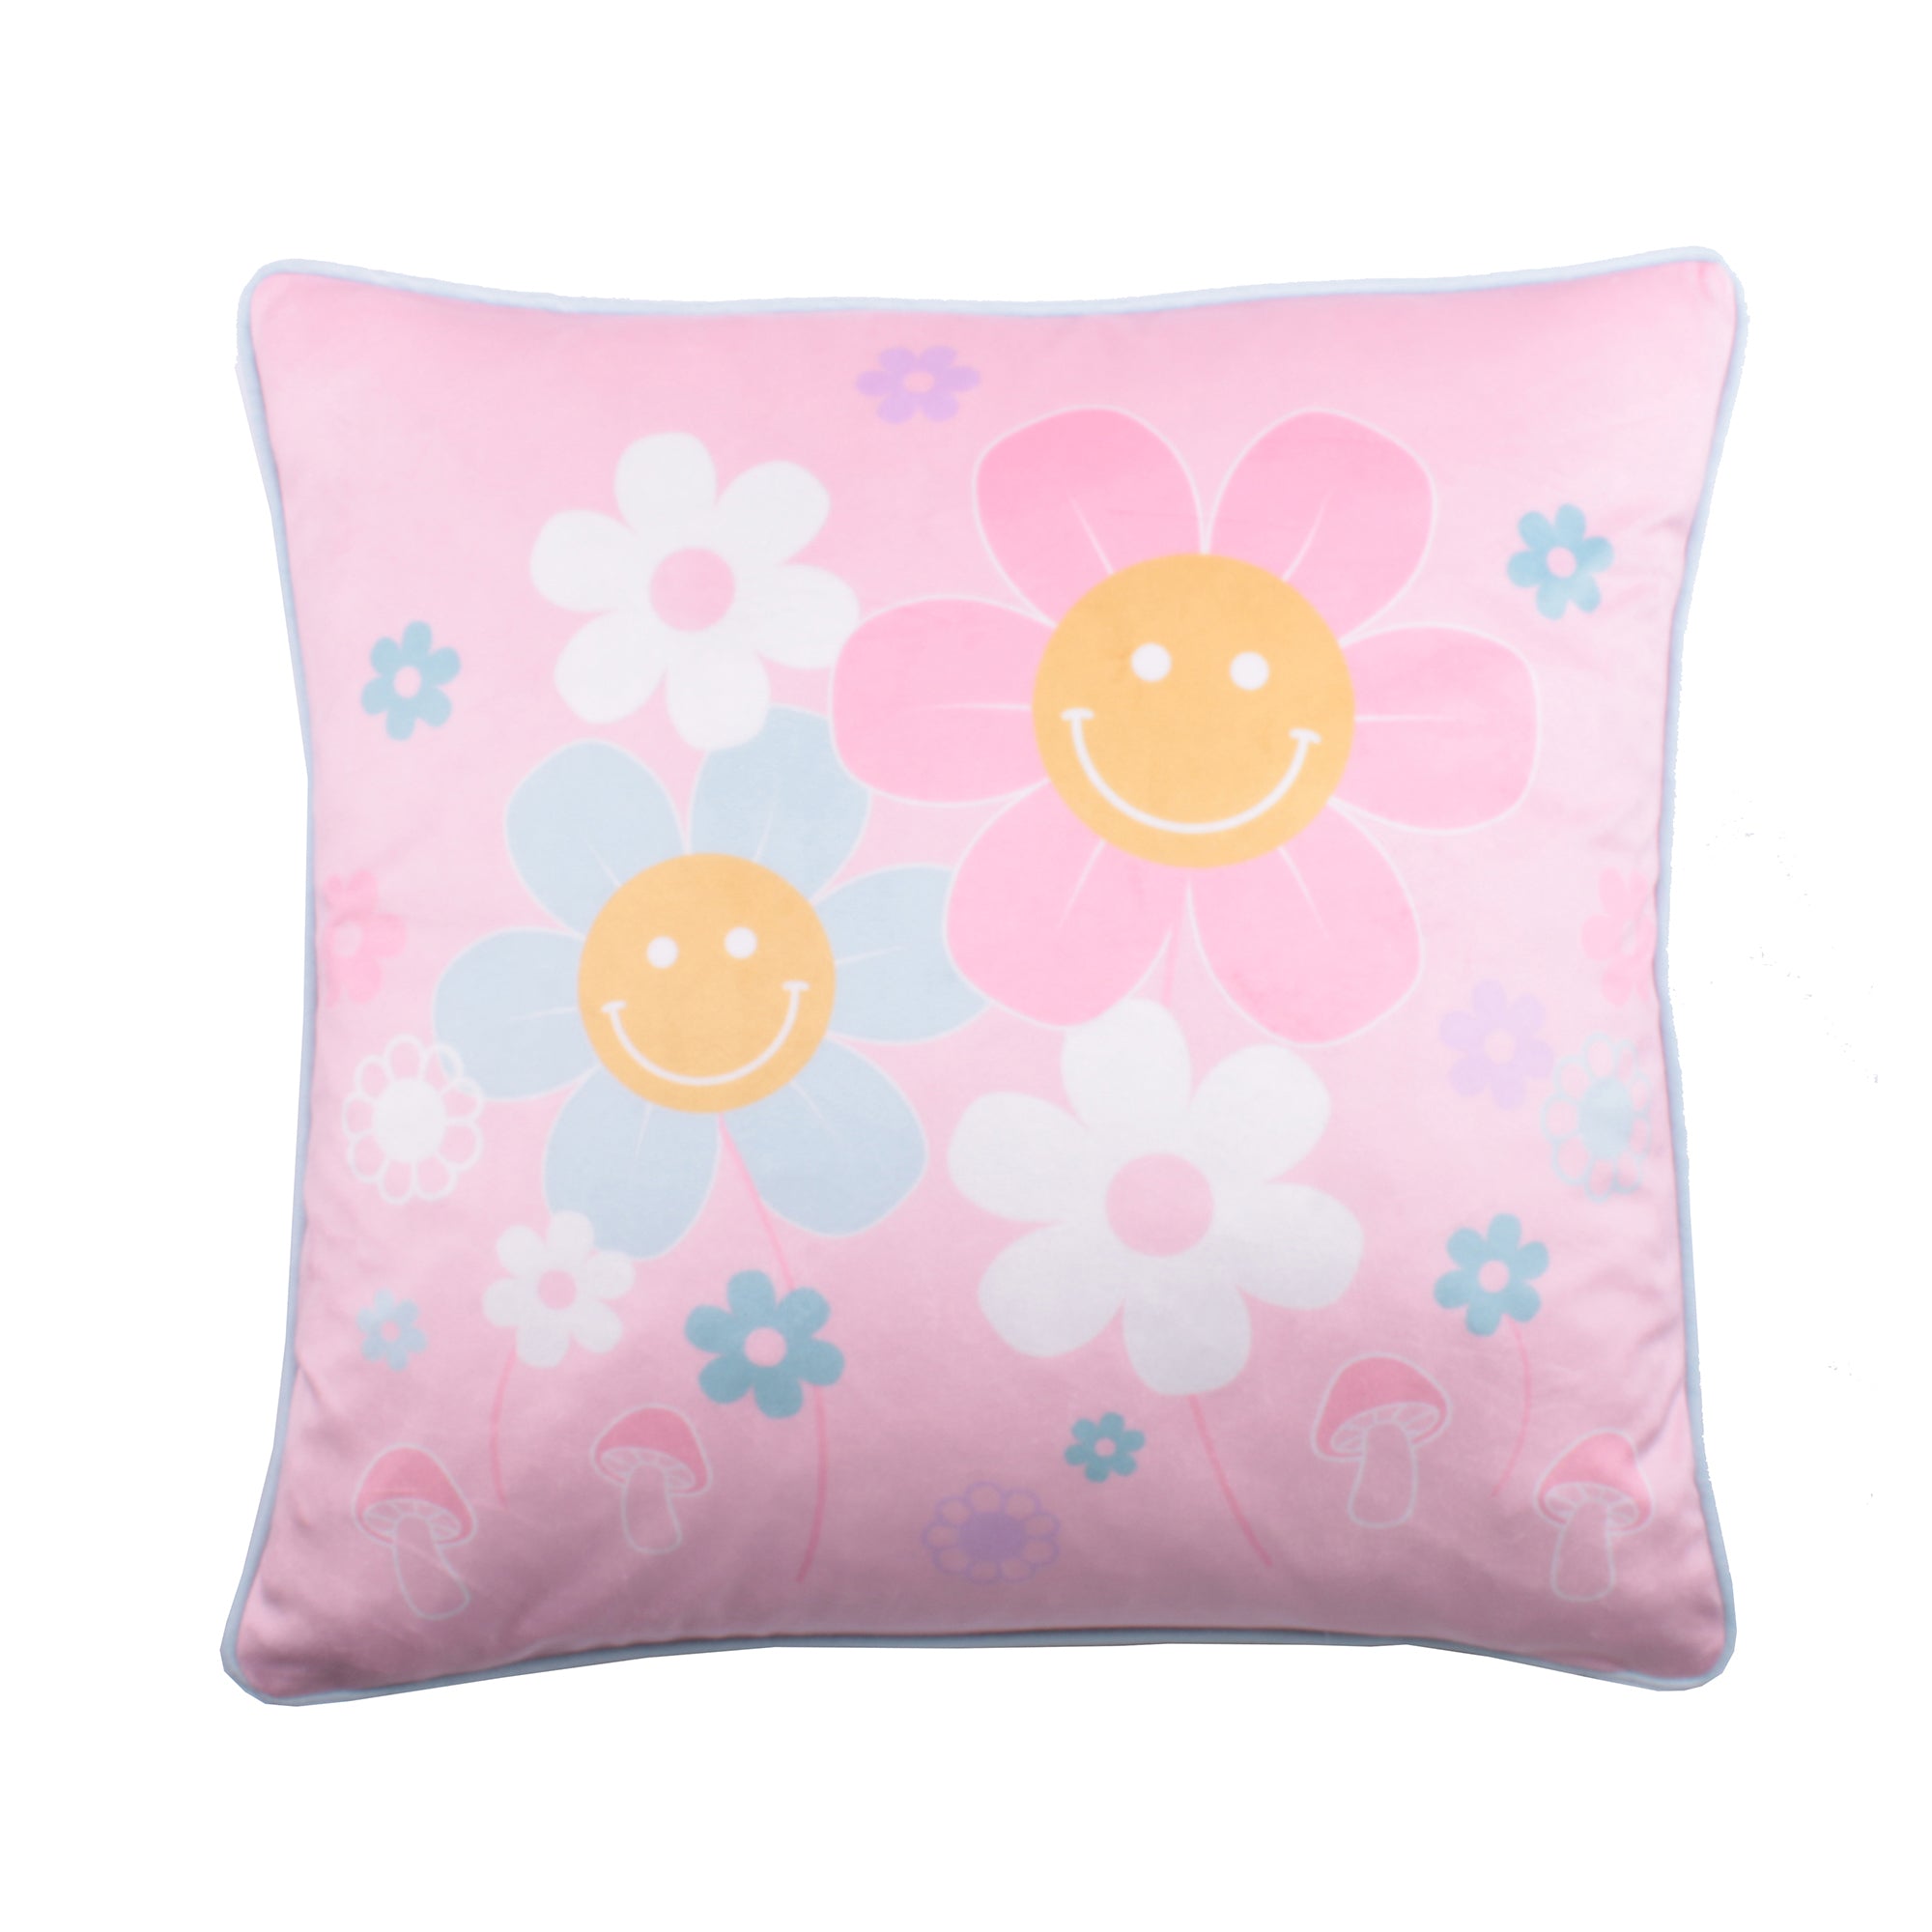 Cushion Cover Retro Flower by Bedlam in Pink